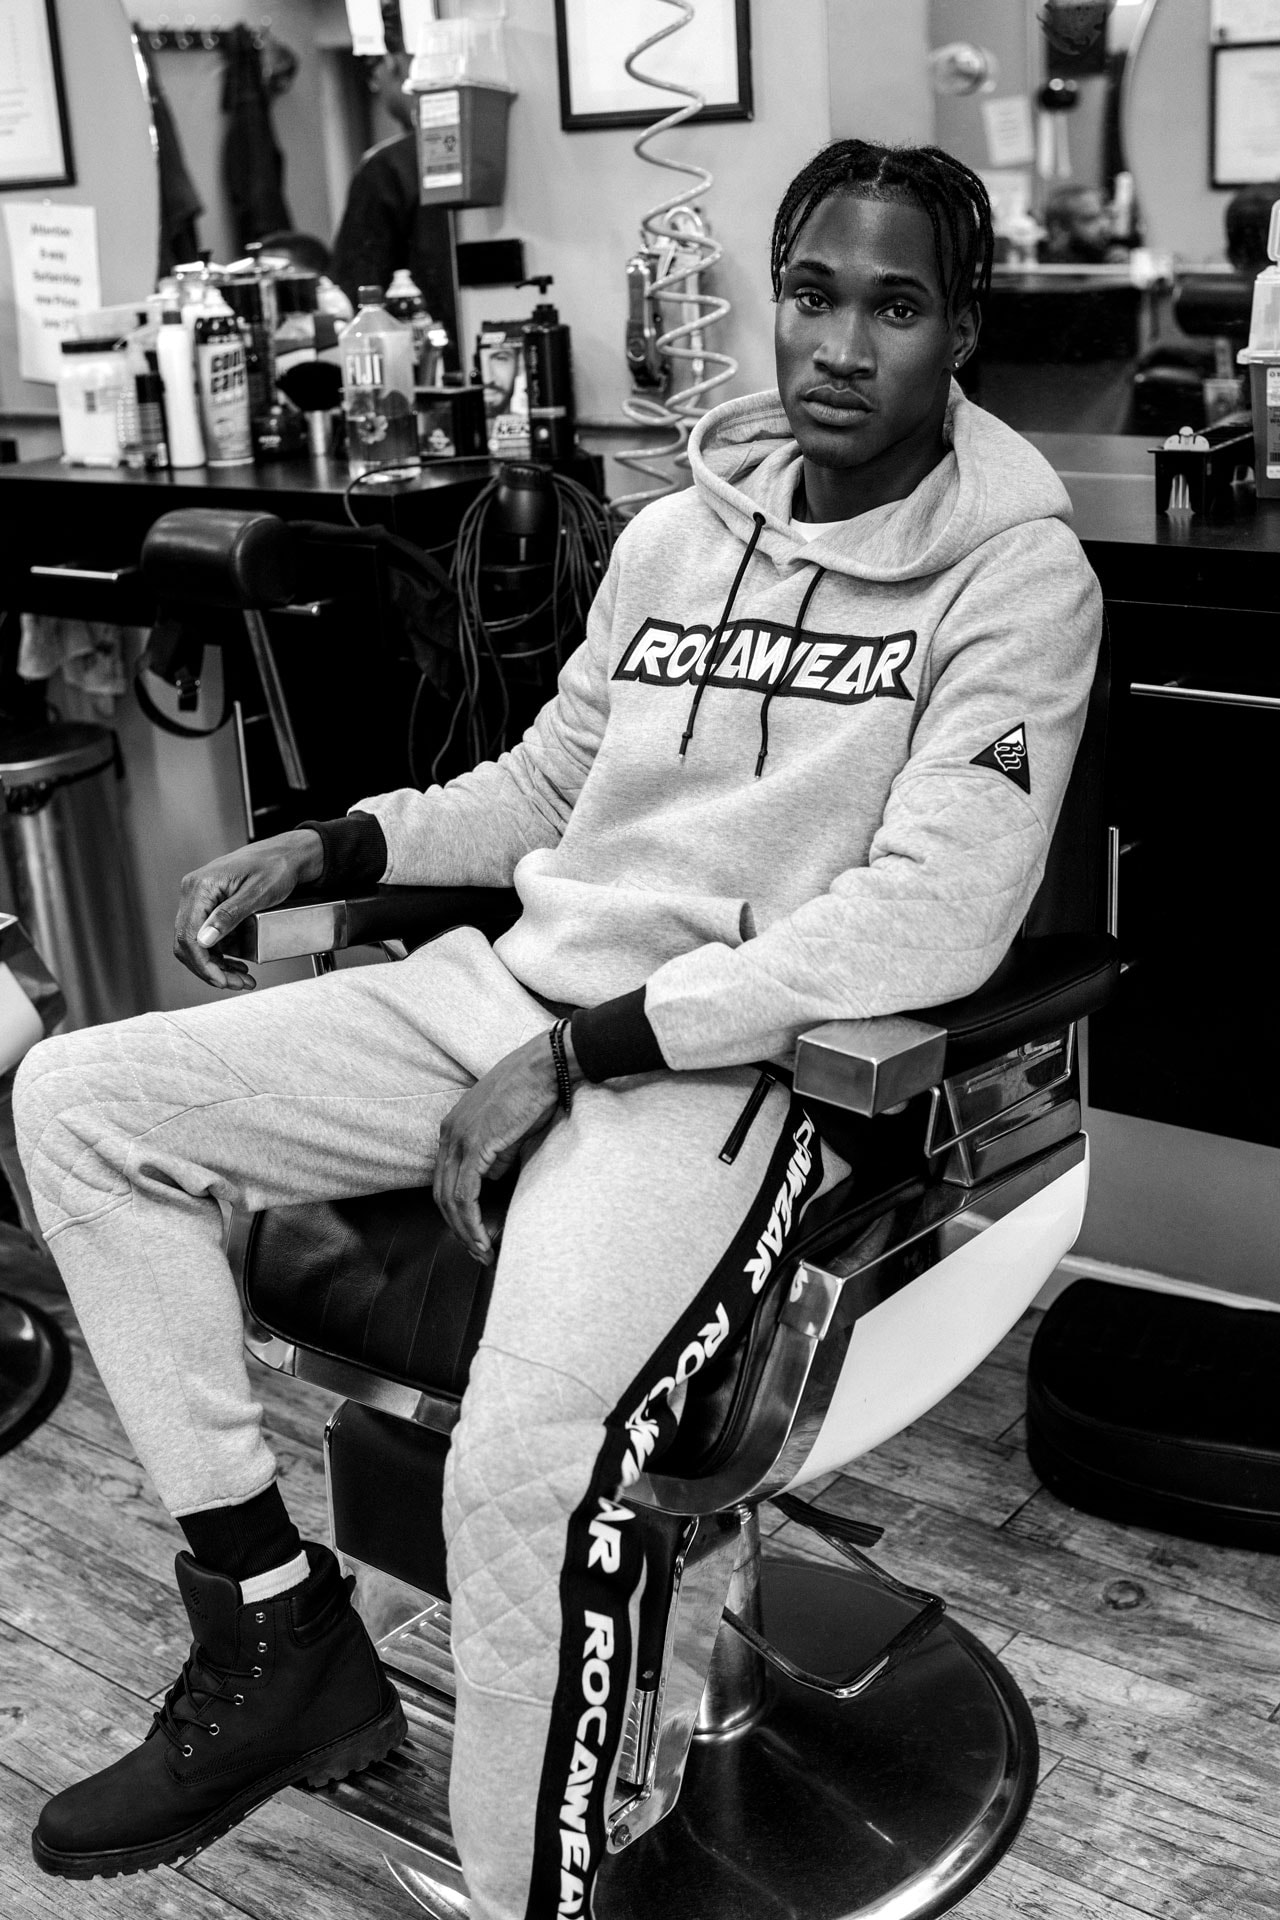 Rocawear 20 years of hip-hop inspired streetwear new collection dame dash jay-z timbs deadass camo pants sweatsuits nate carty anthony white new york city streets subway